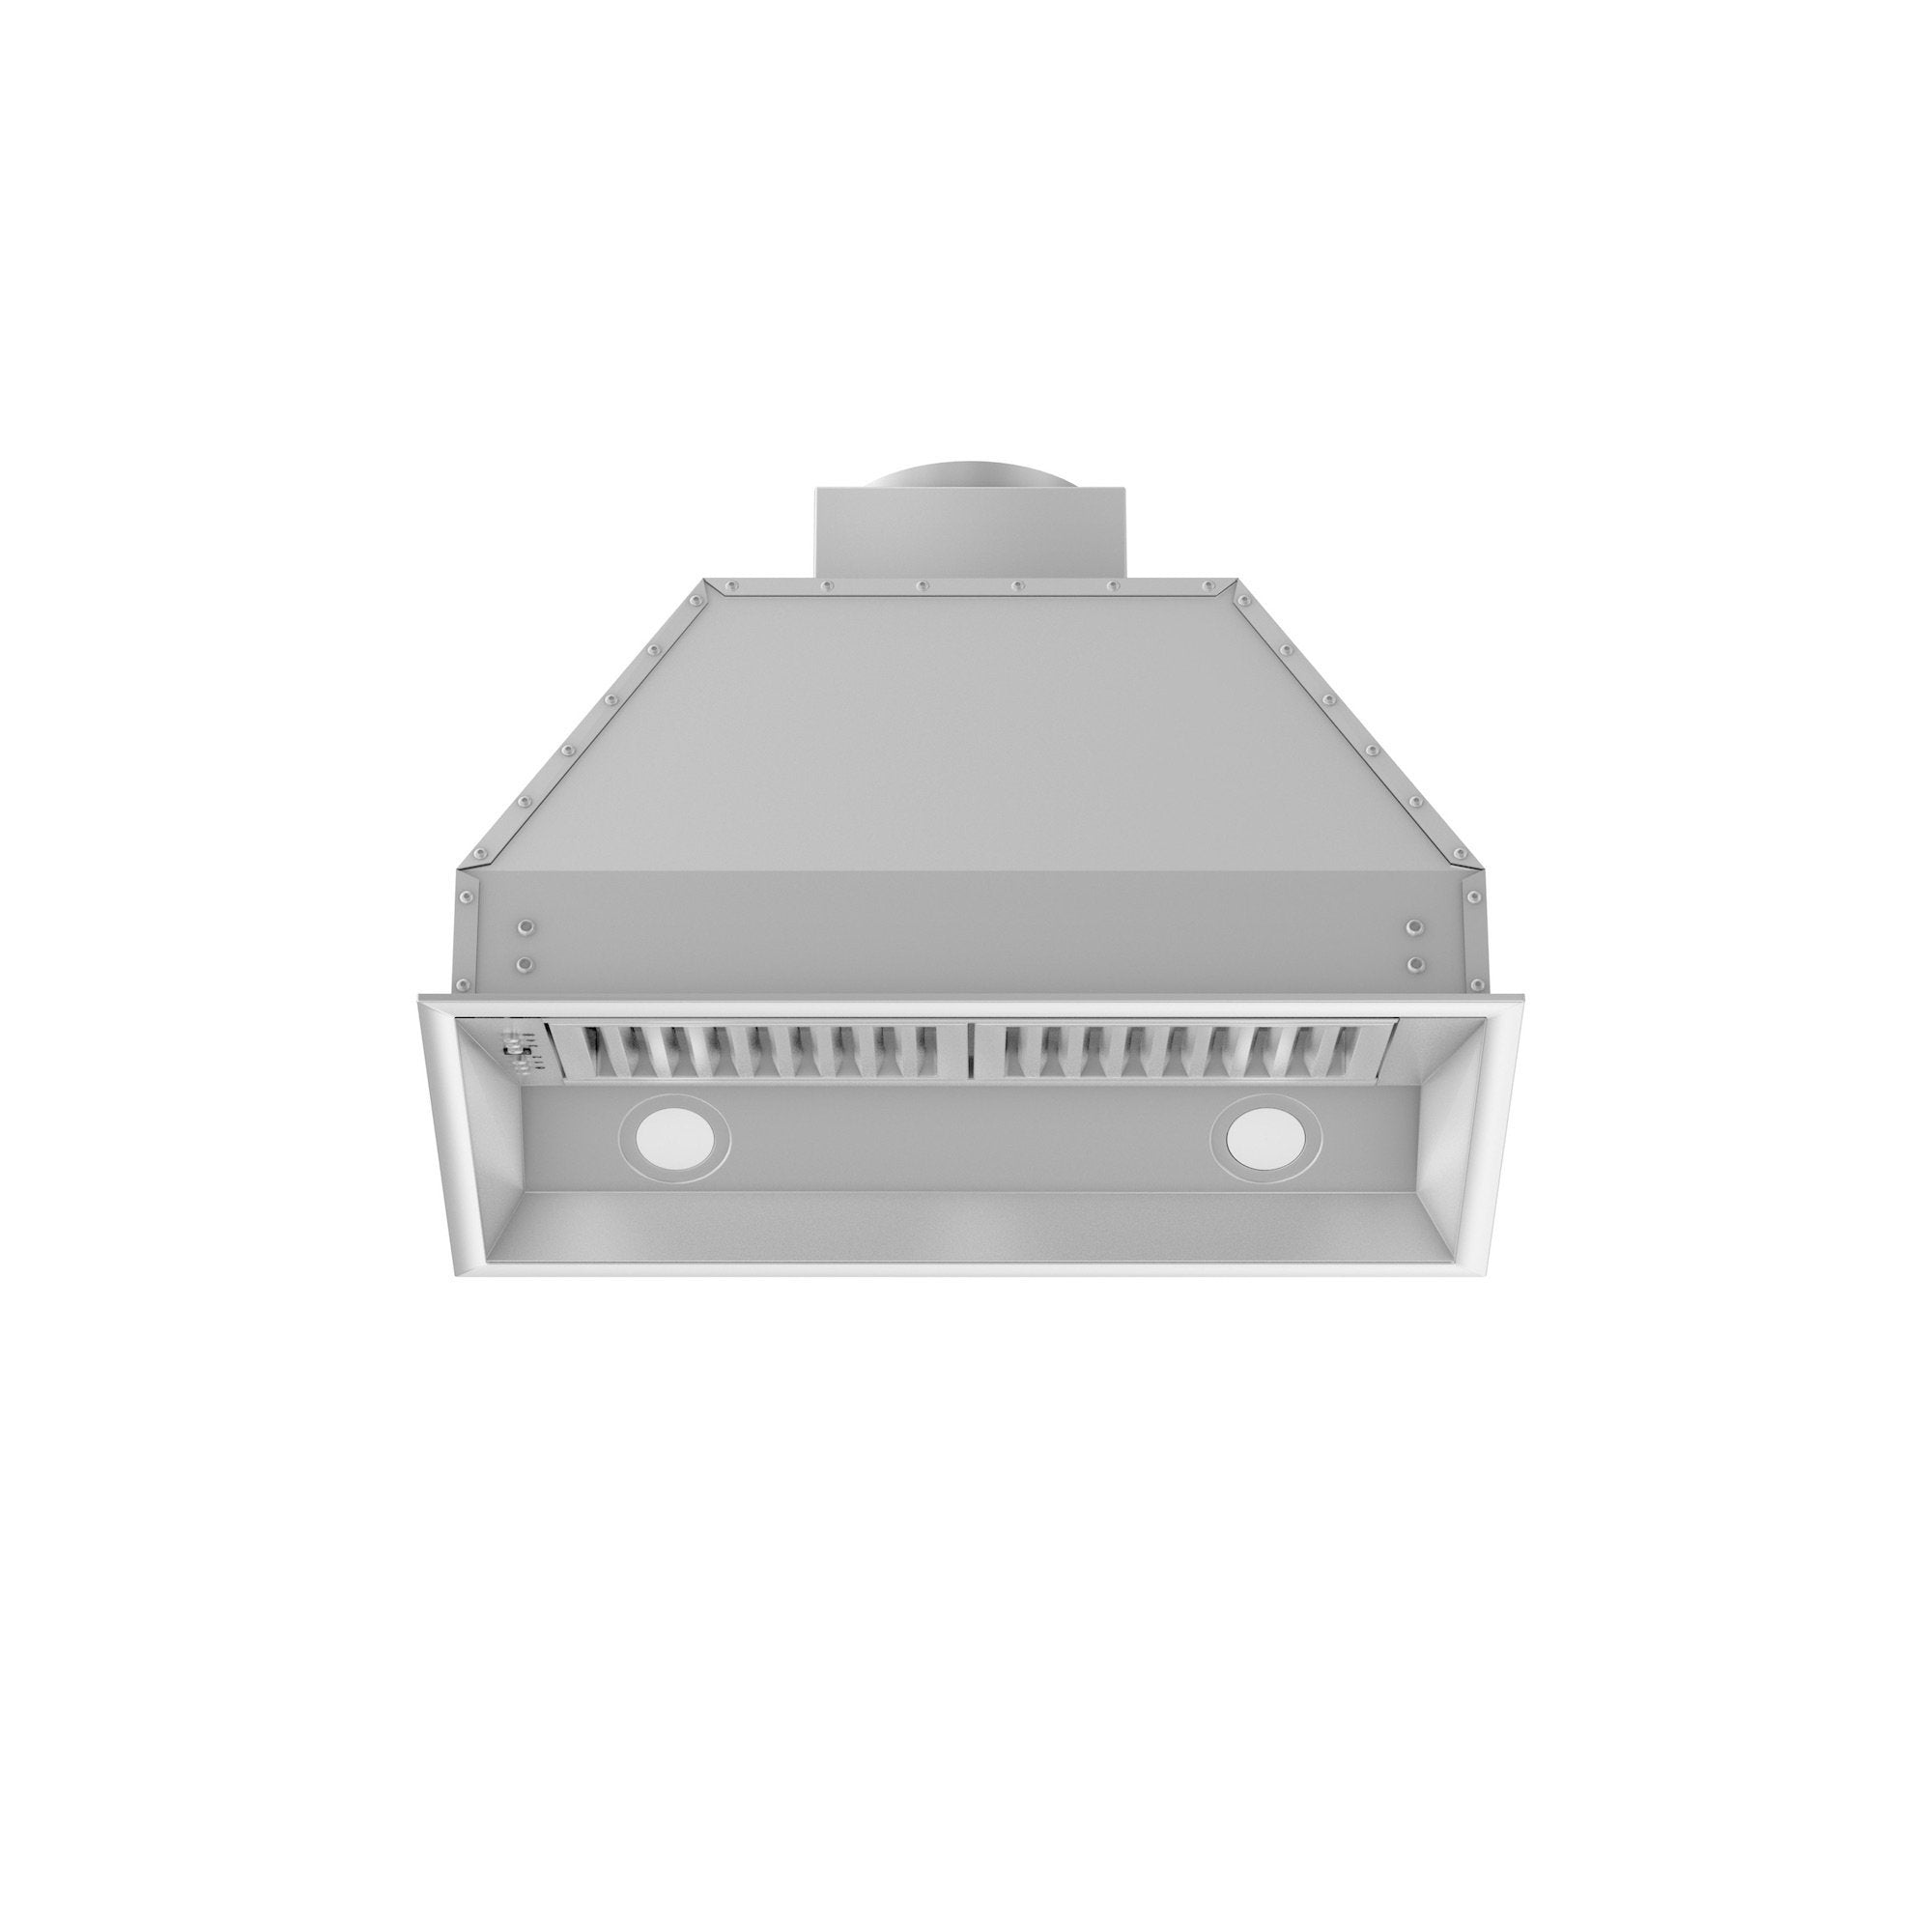 ZLINE 34" Ducted Wall Mount Range Hood Insert in Outdoor Approved Stainless Steel (695-304-34)